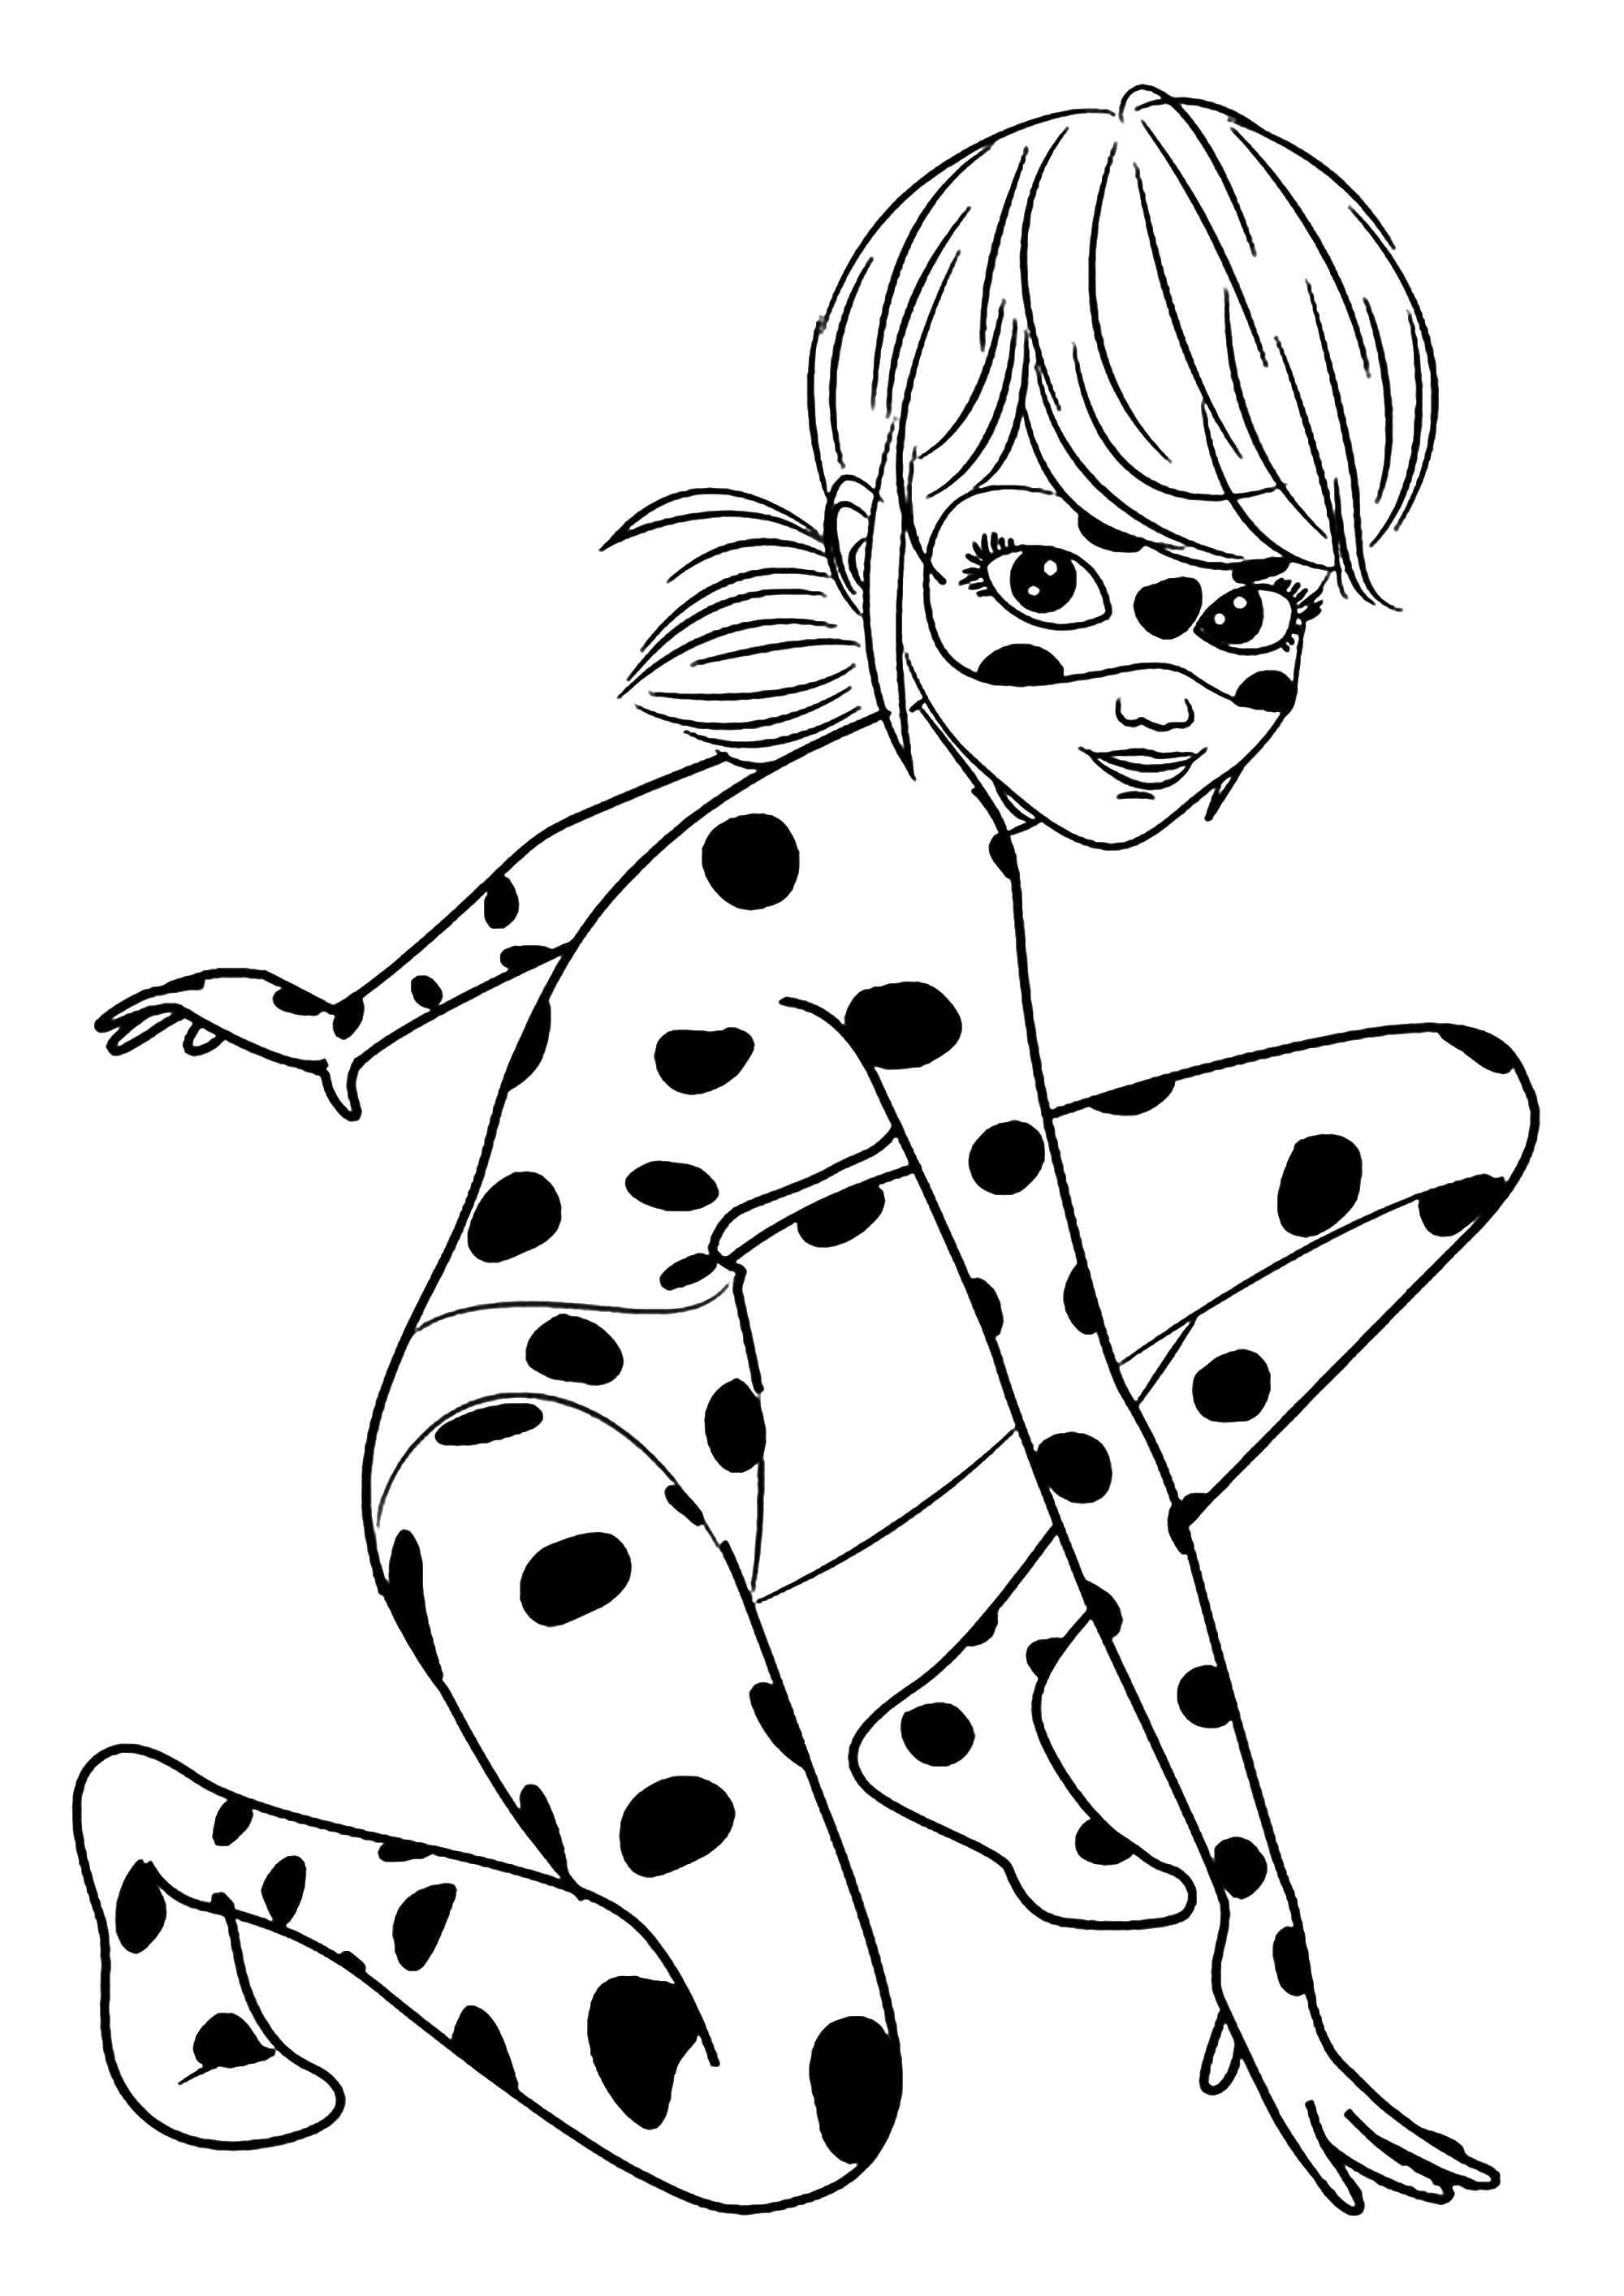 Miraculous lady bug coloring for children